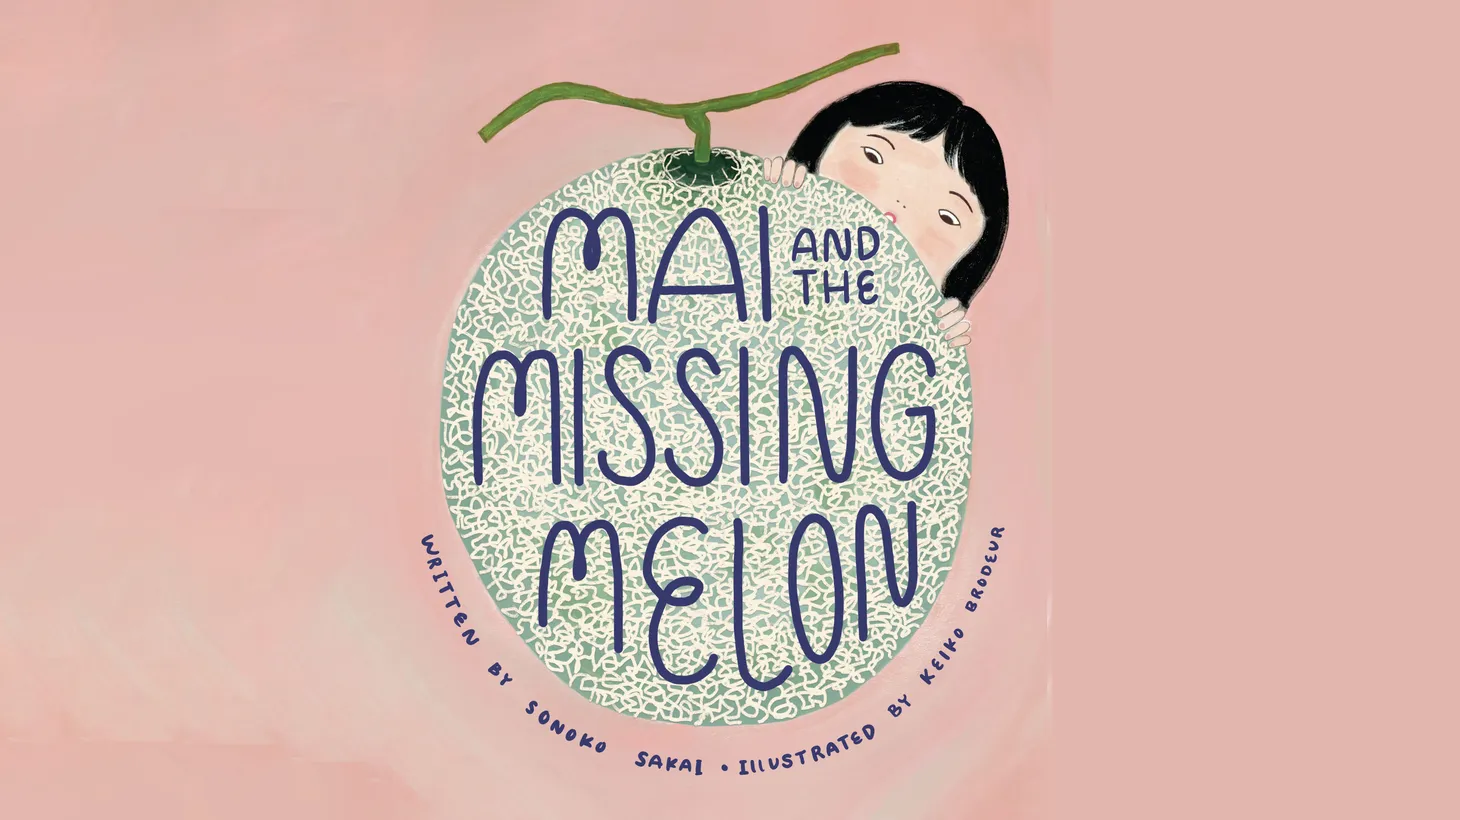 “Mai and the Missing Melon” follows a young girl who wakes up to the smell of a ripe melon in her house.